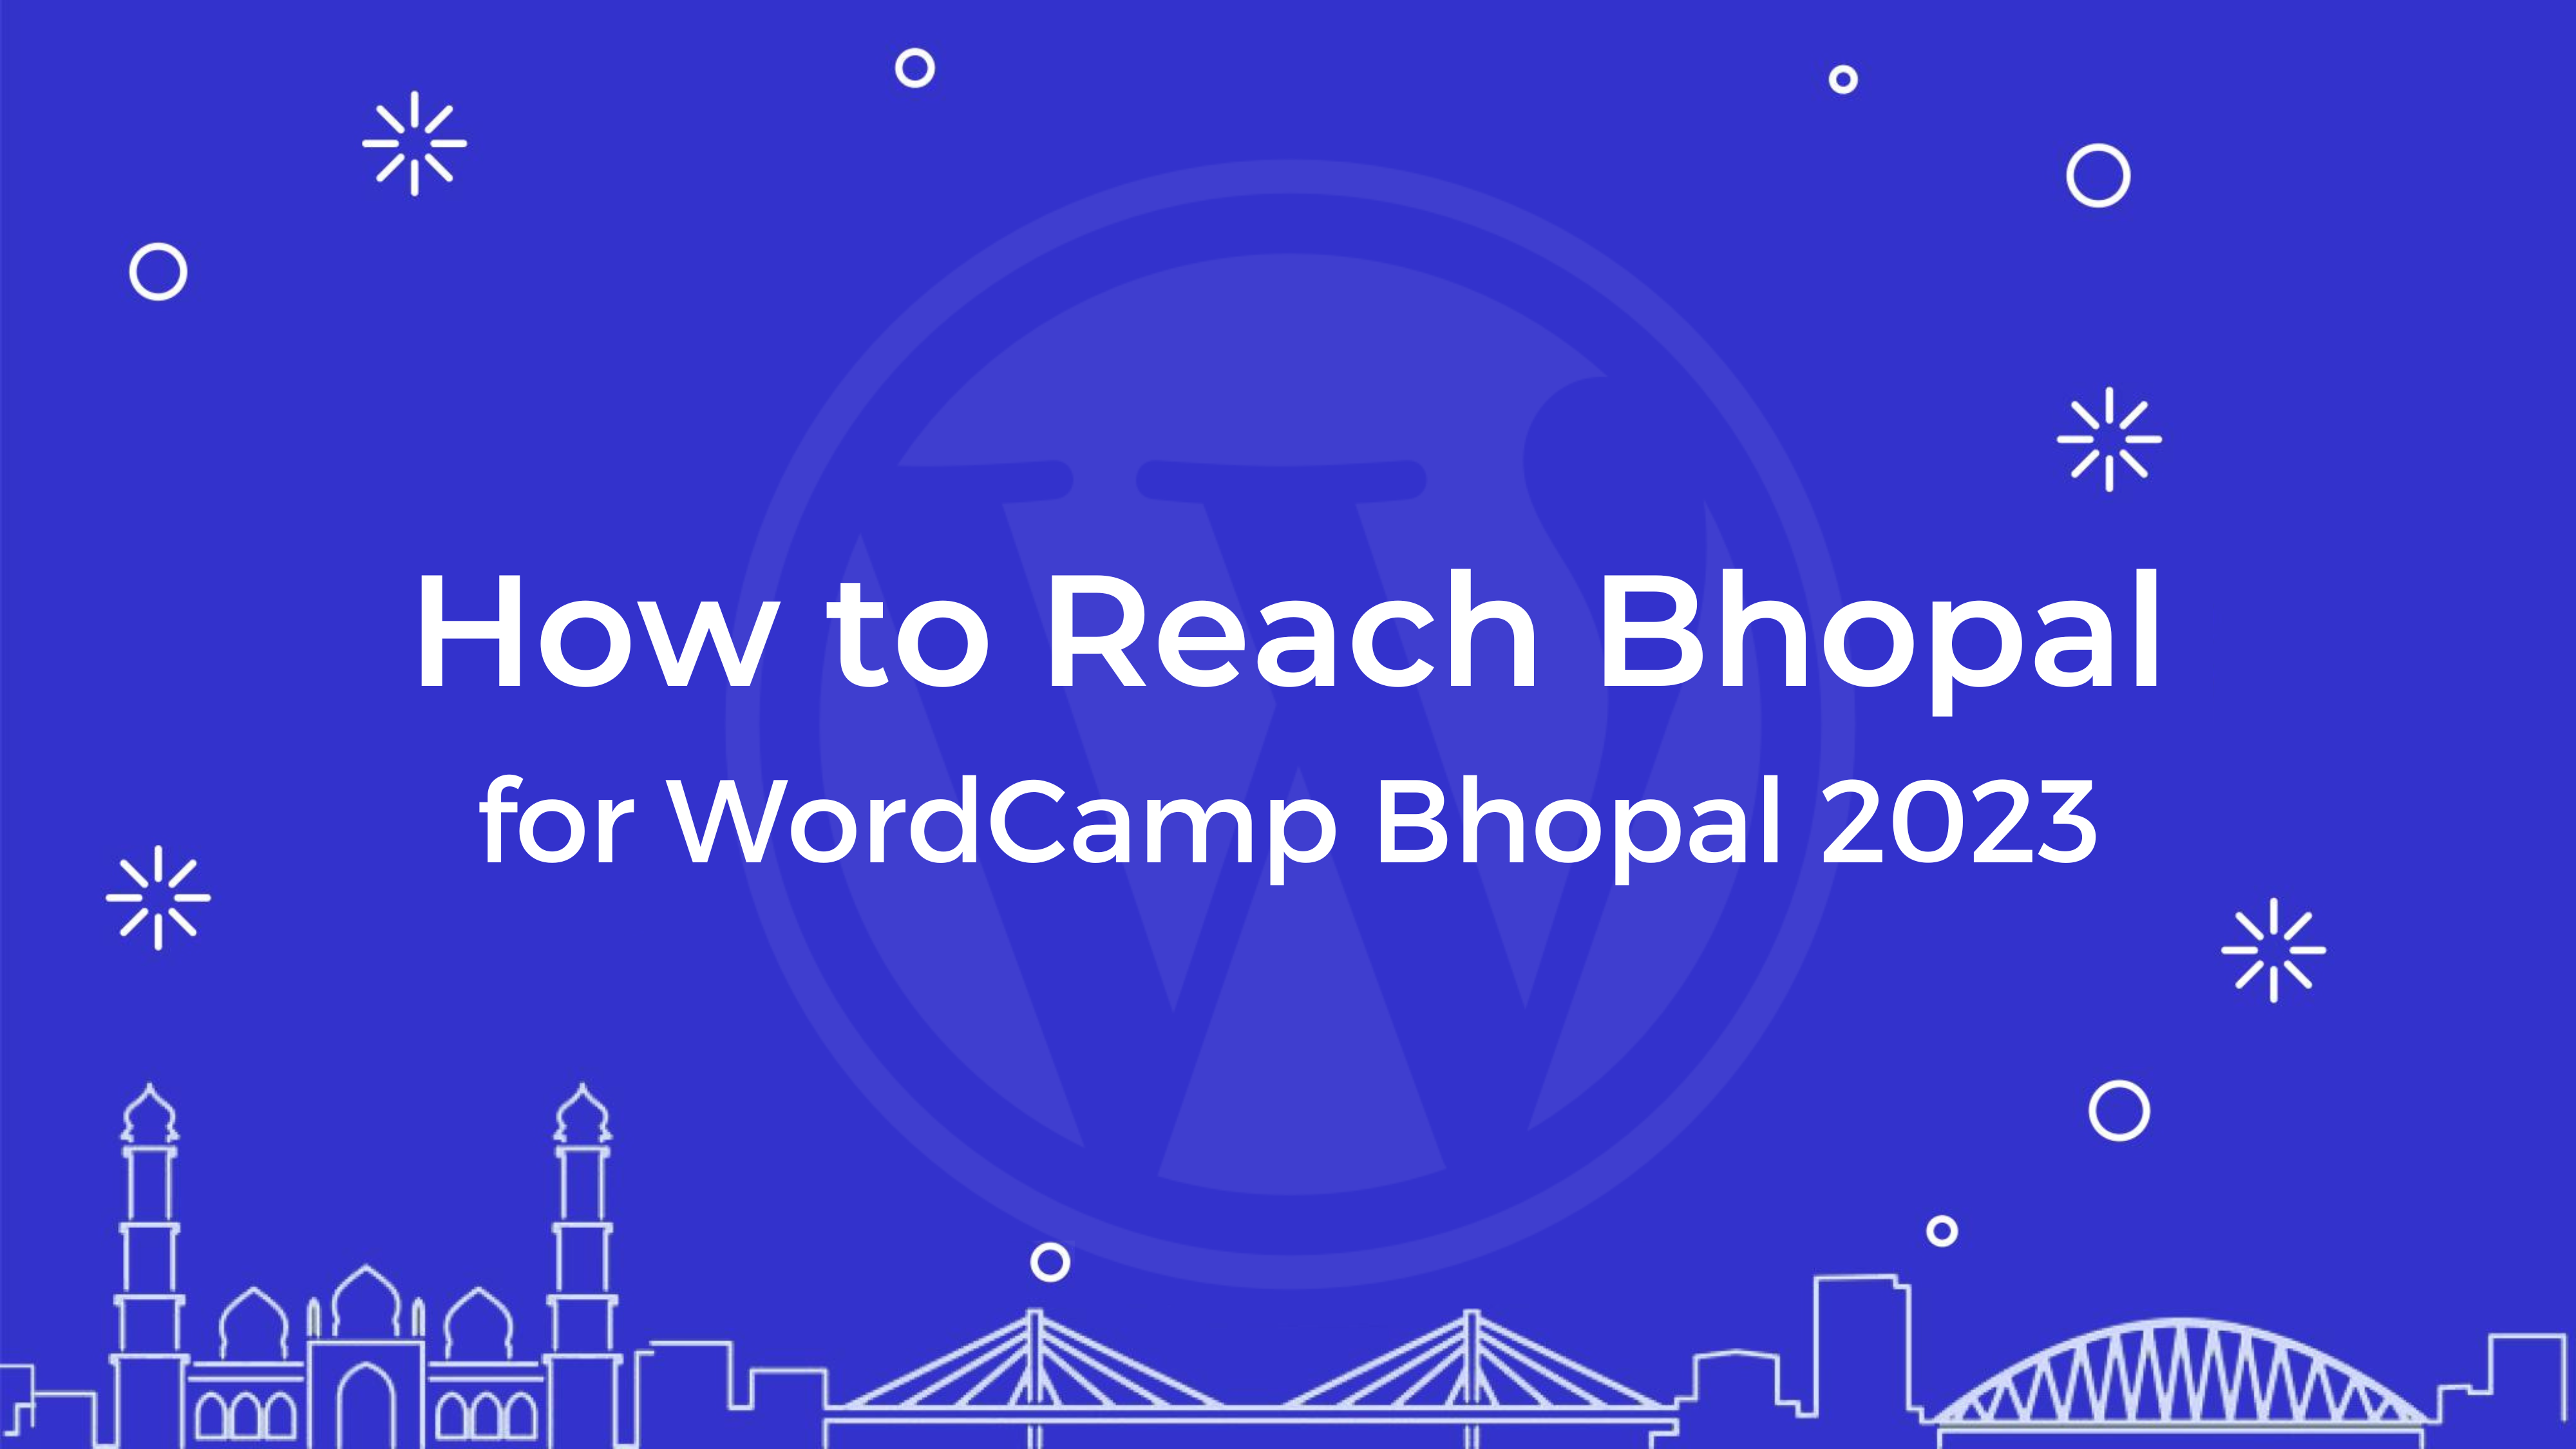 Your Journey to WordCamp Bhopal 2023: How to Reach the Heart of India